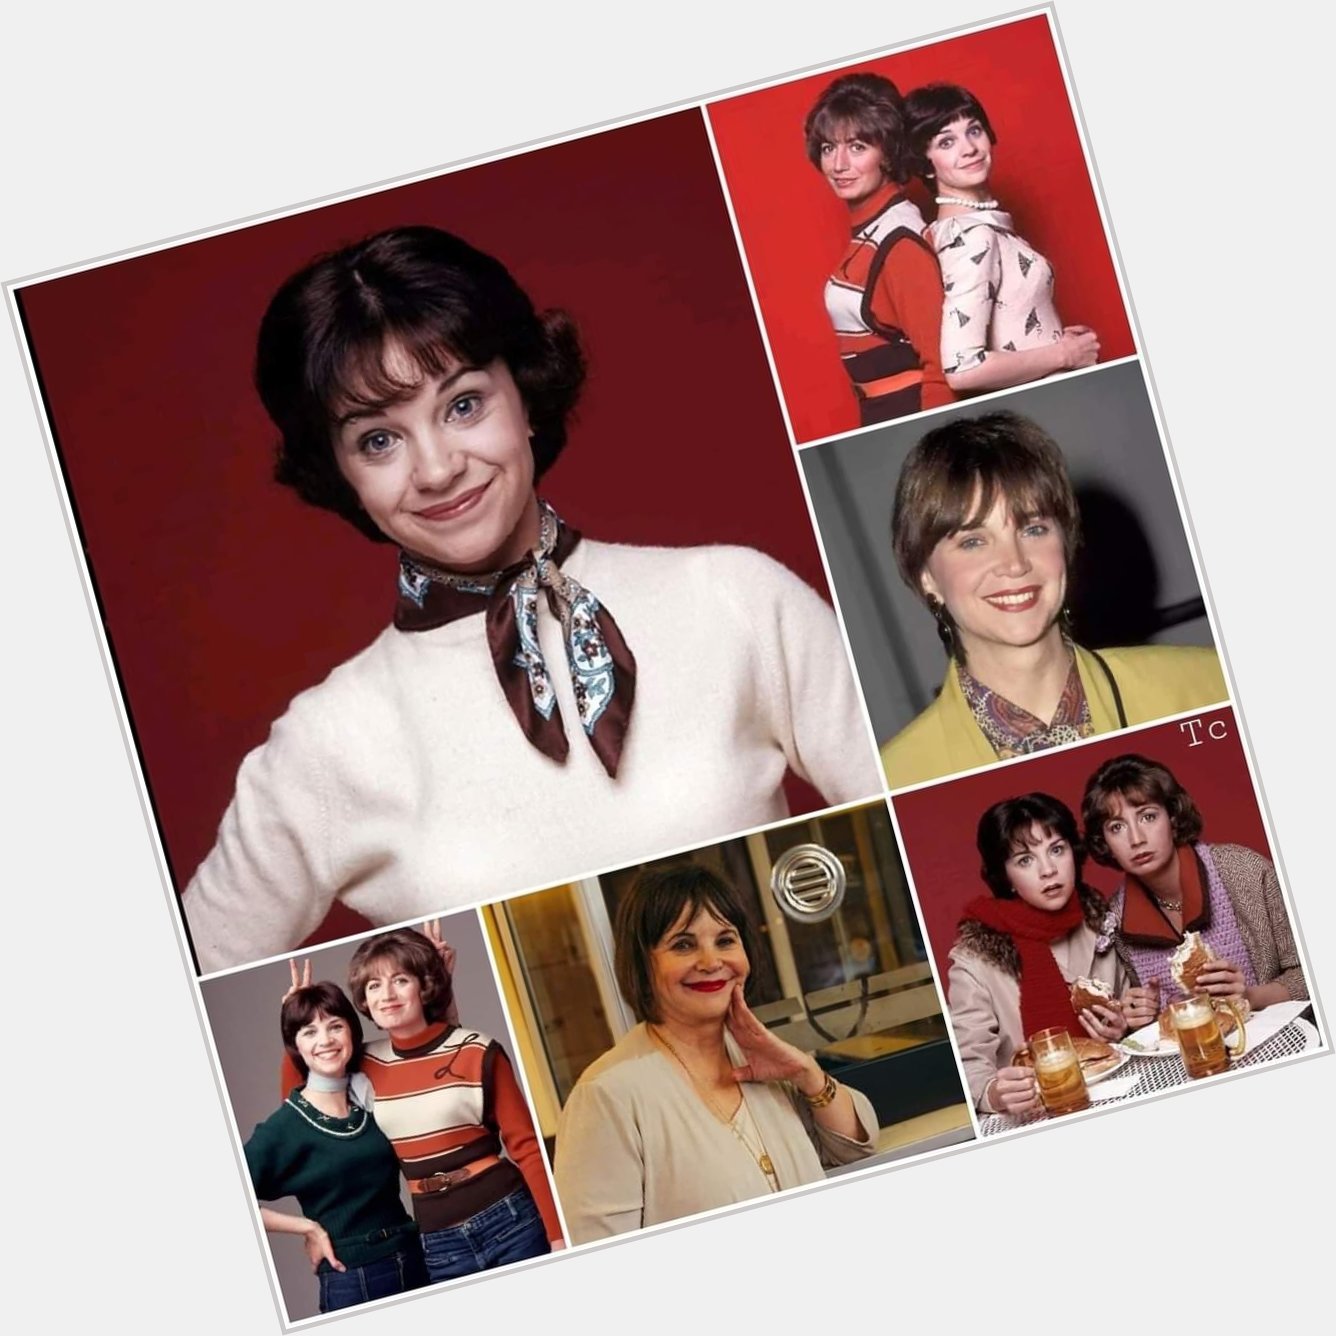 Happy 74th Birthday! Cindy Williams from the tv Classic Laverne & Shirley 